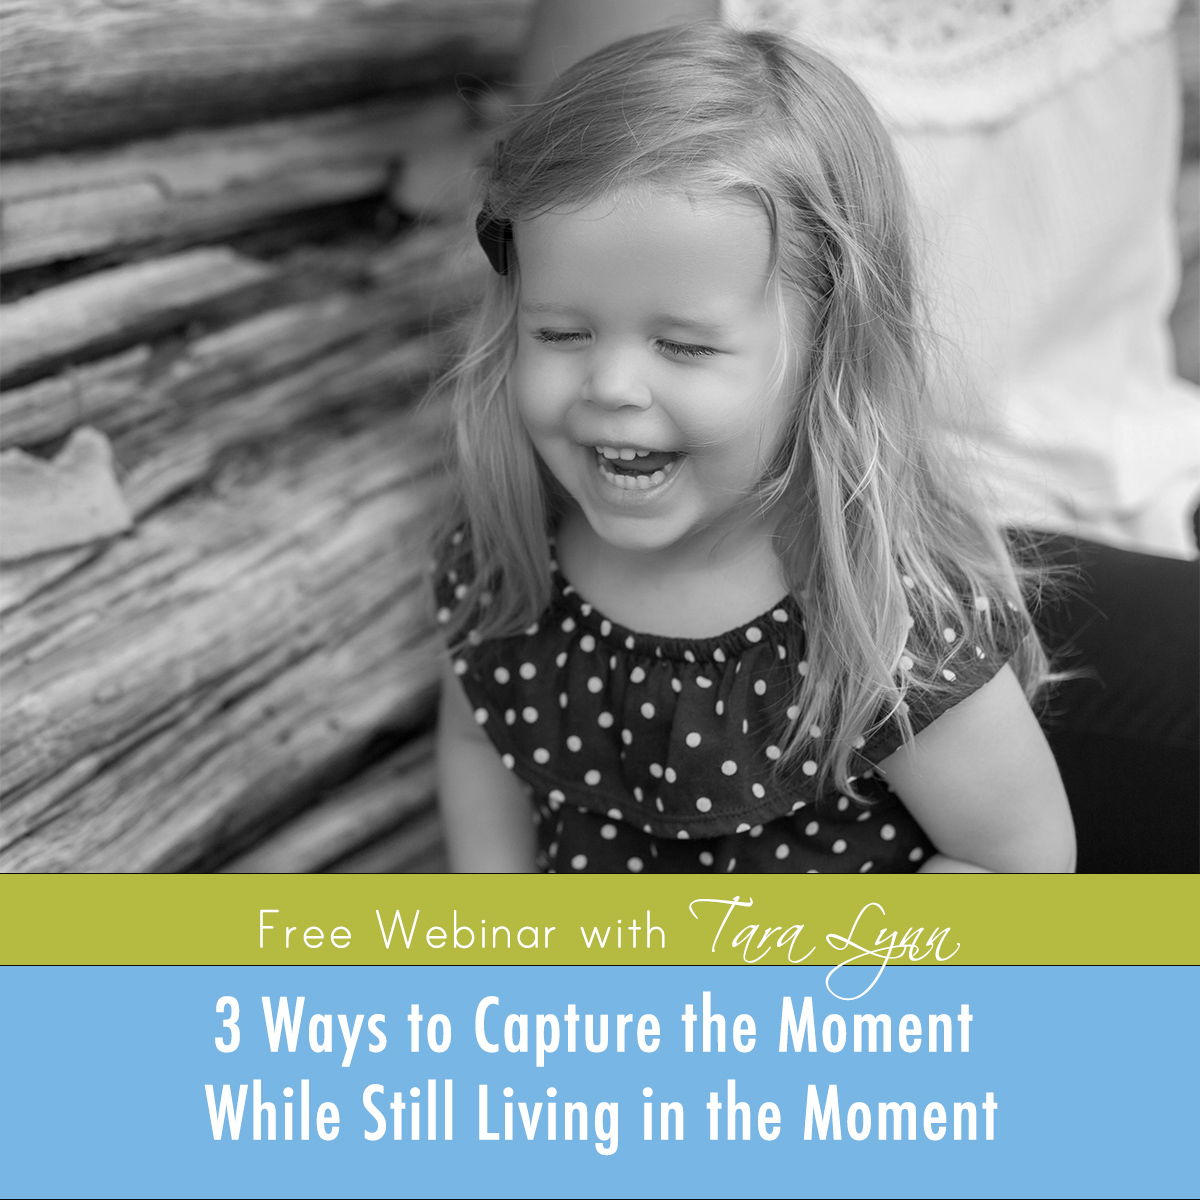 Free Webinar: How to Capture the Moment While Still Living in the Moment